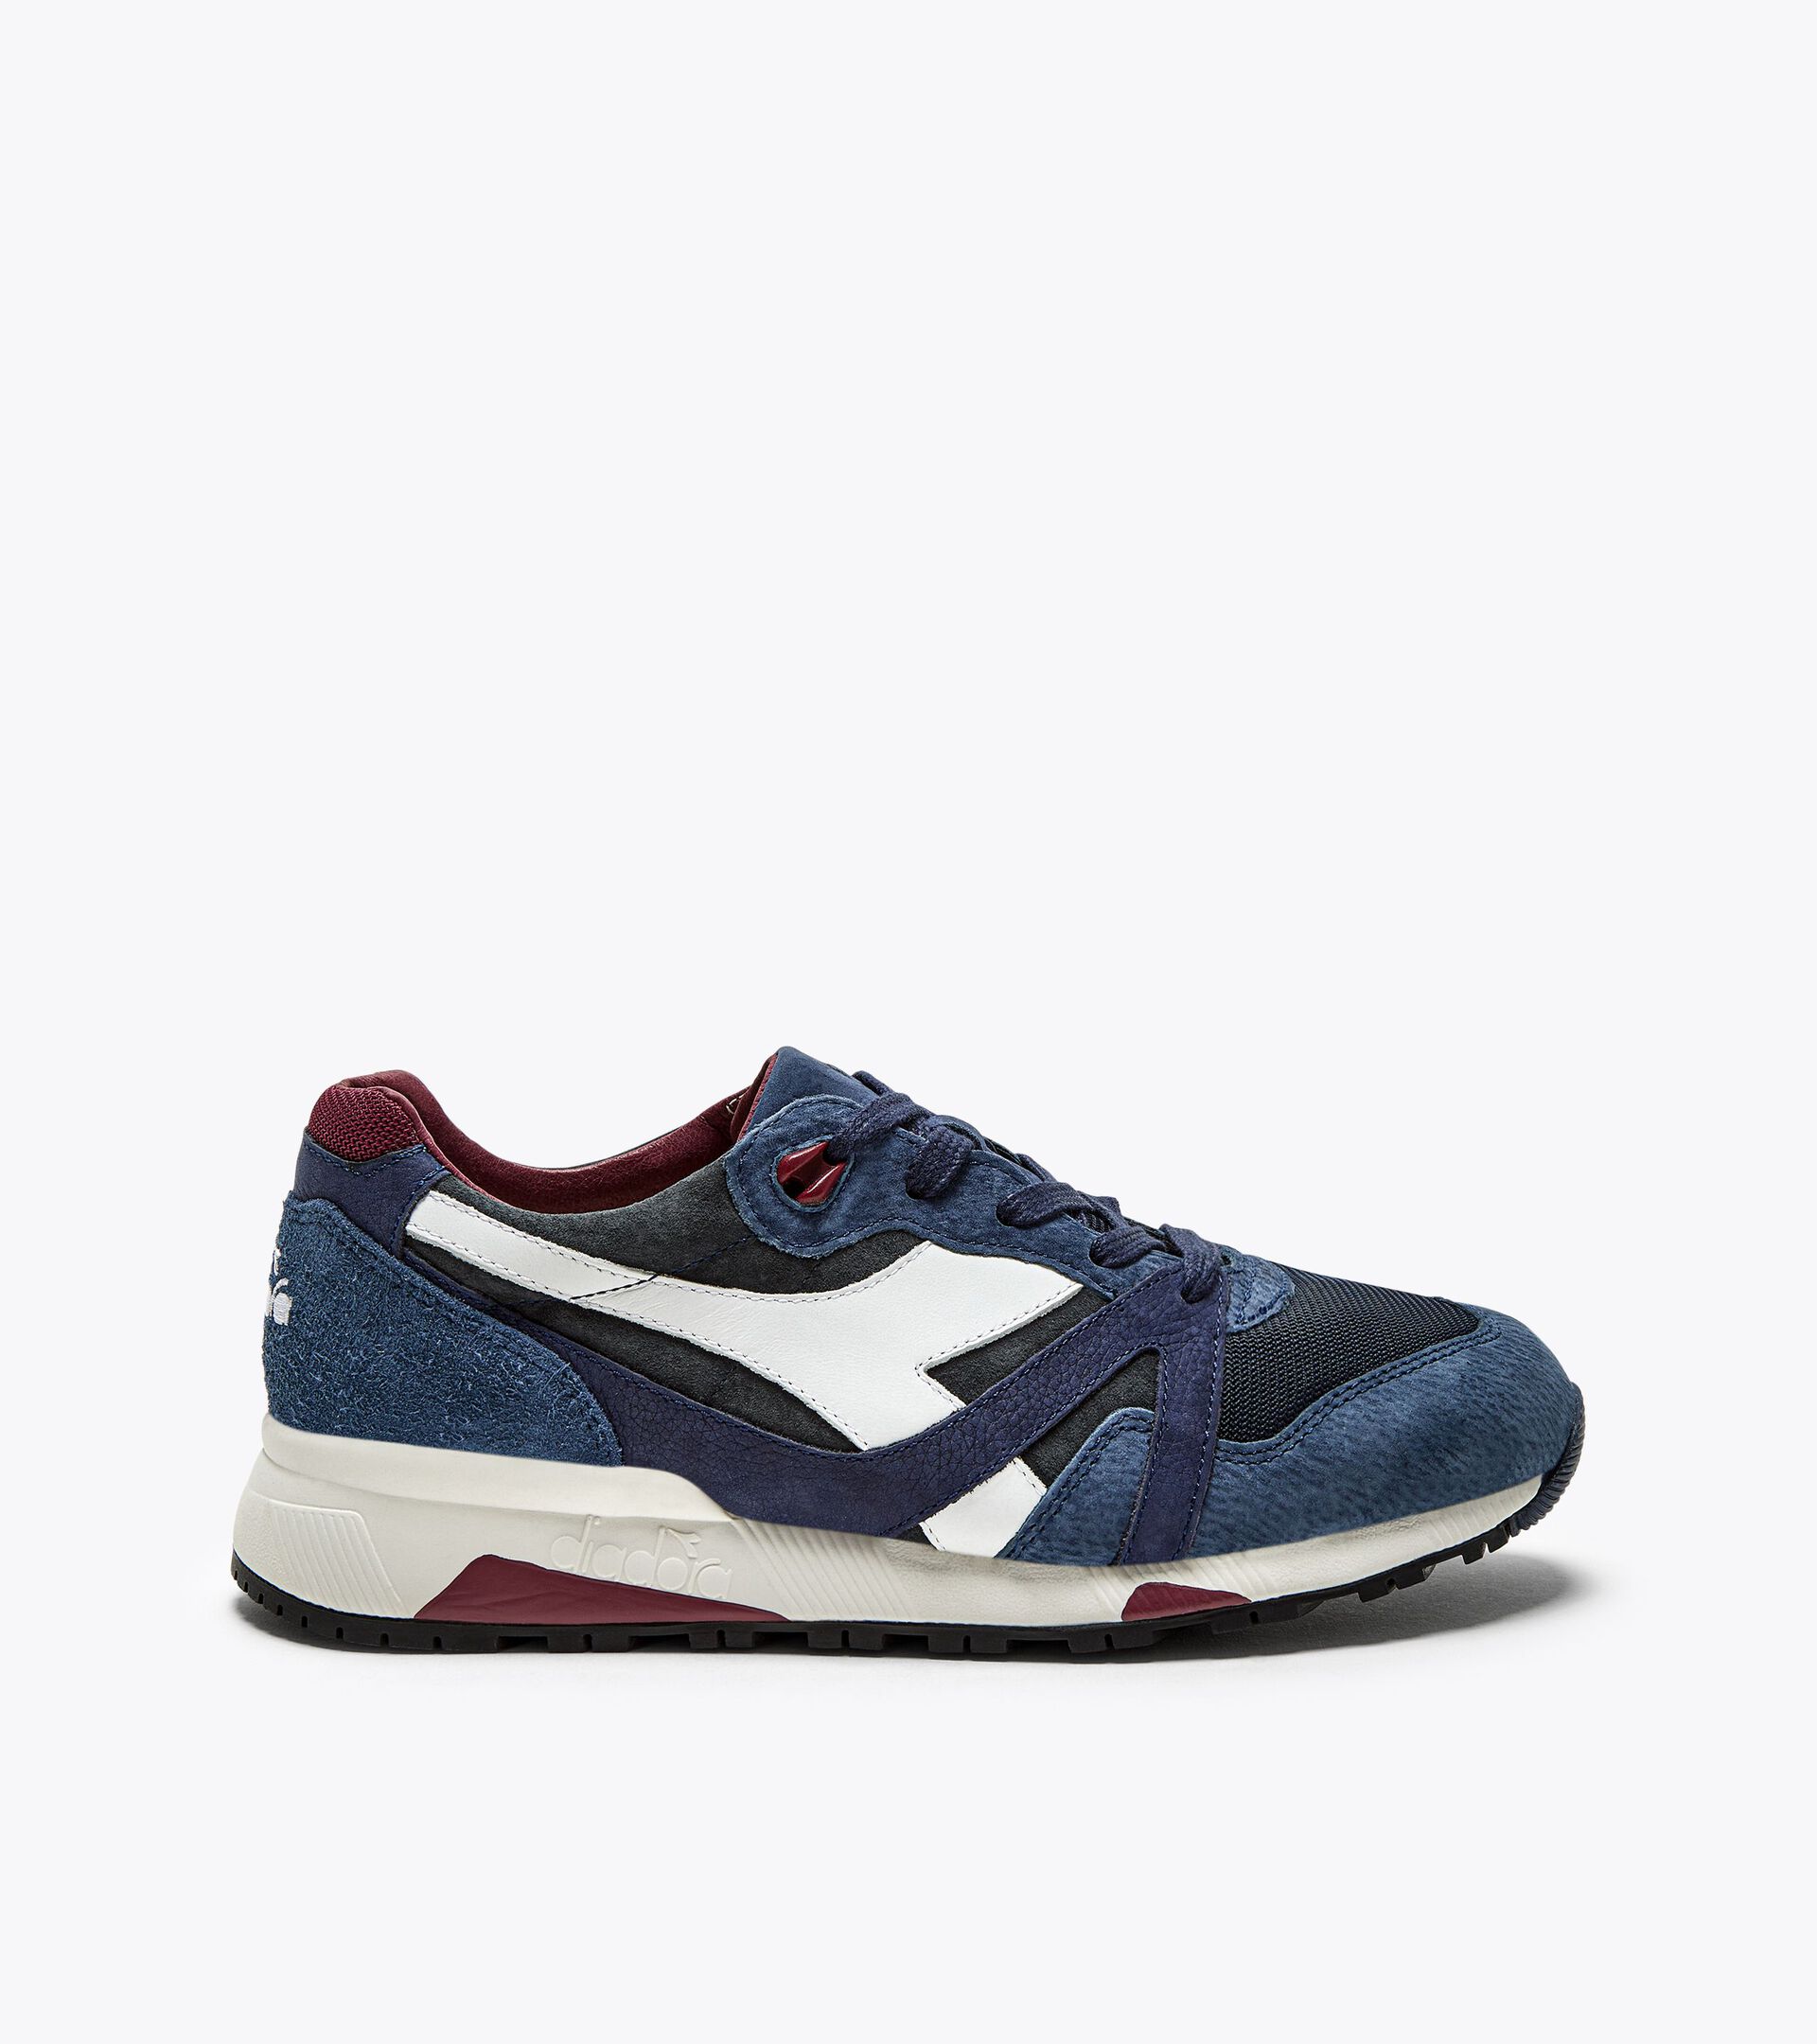 N9000 ITALIA Heritage shoe - Made In Italy - Gender Neutral - Diadora  Online Store US